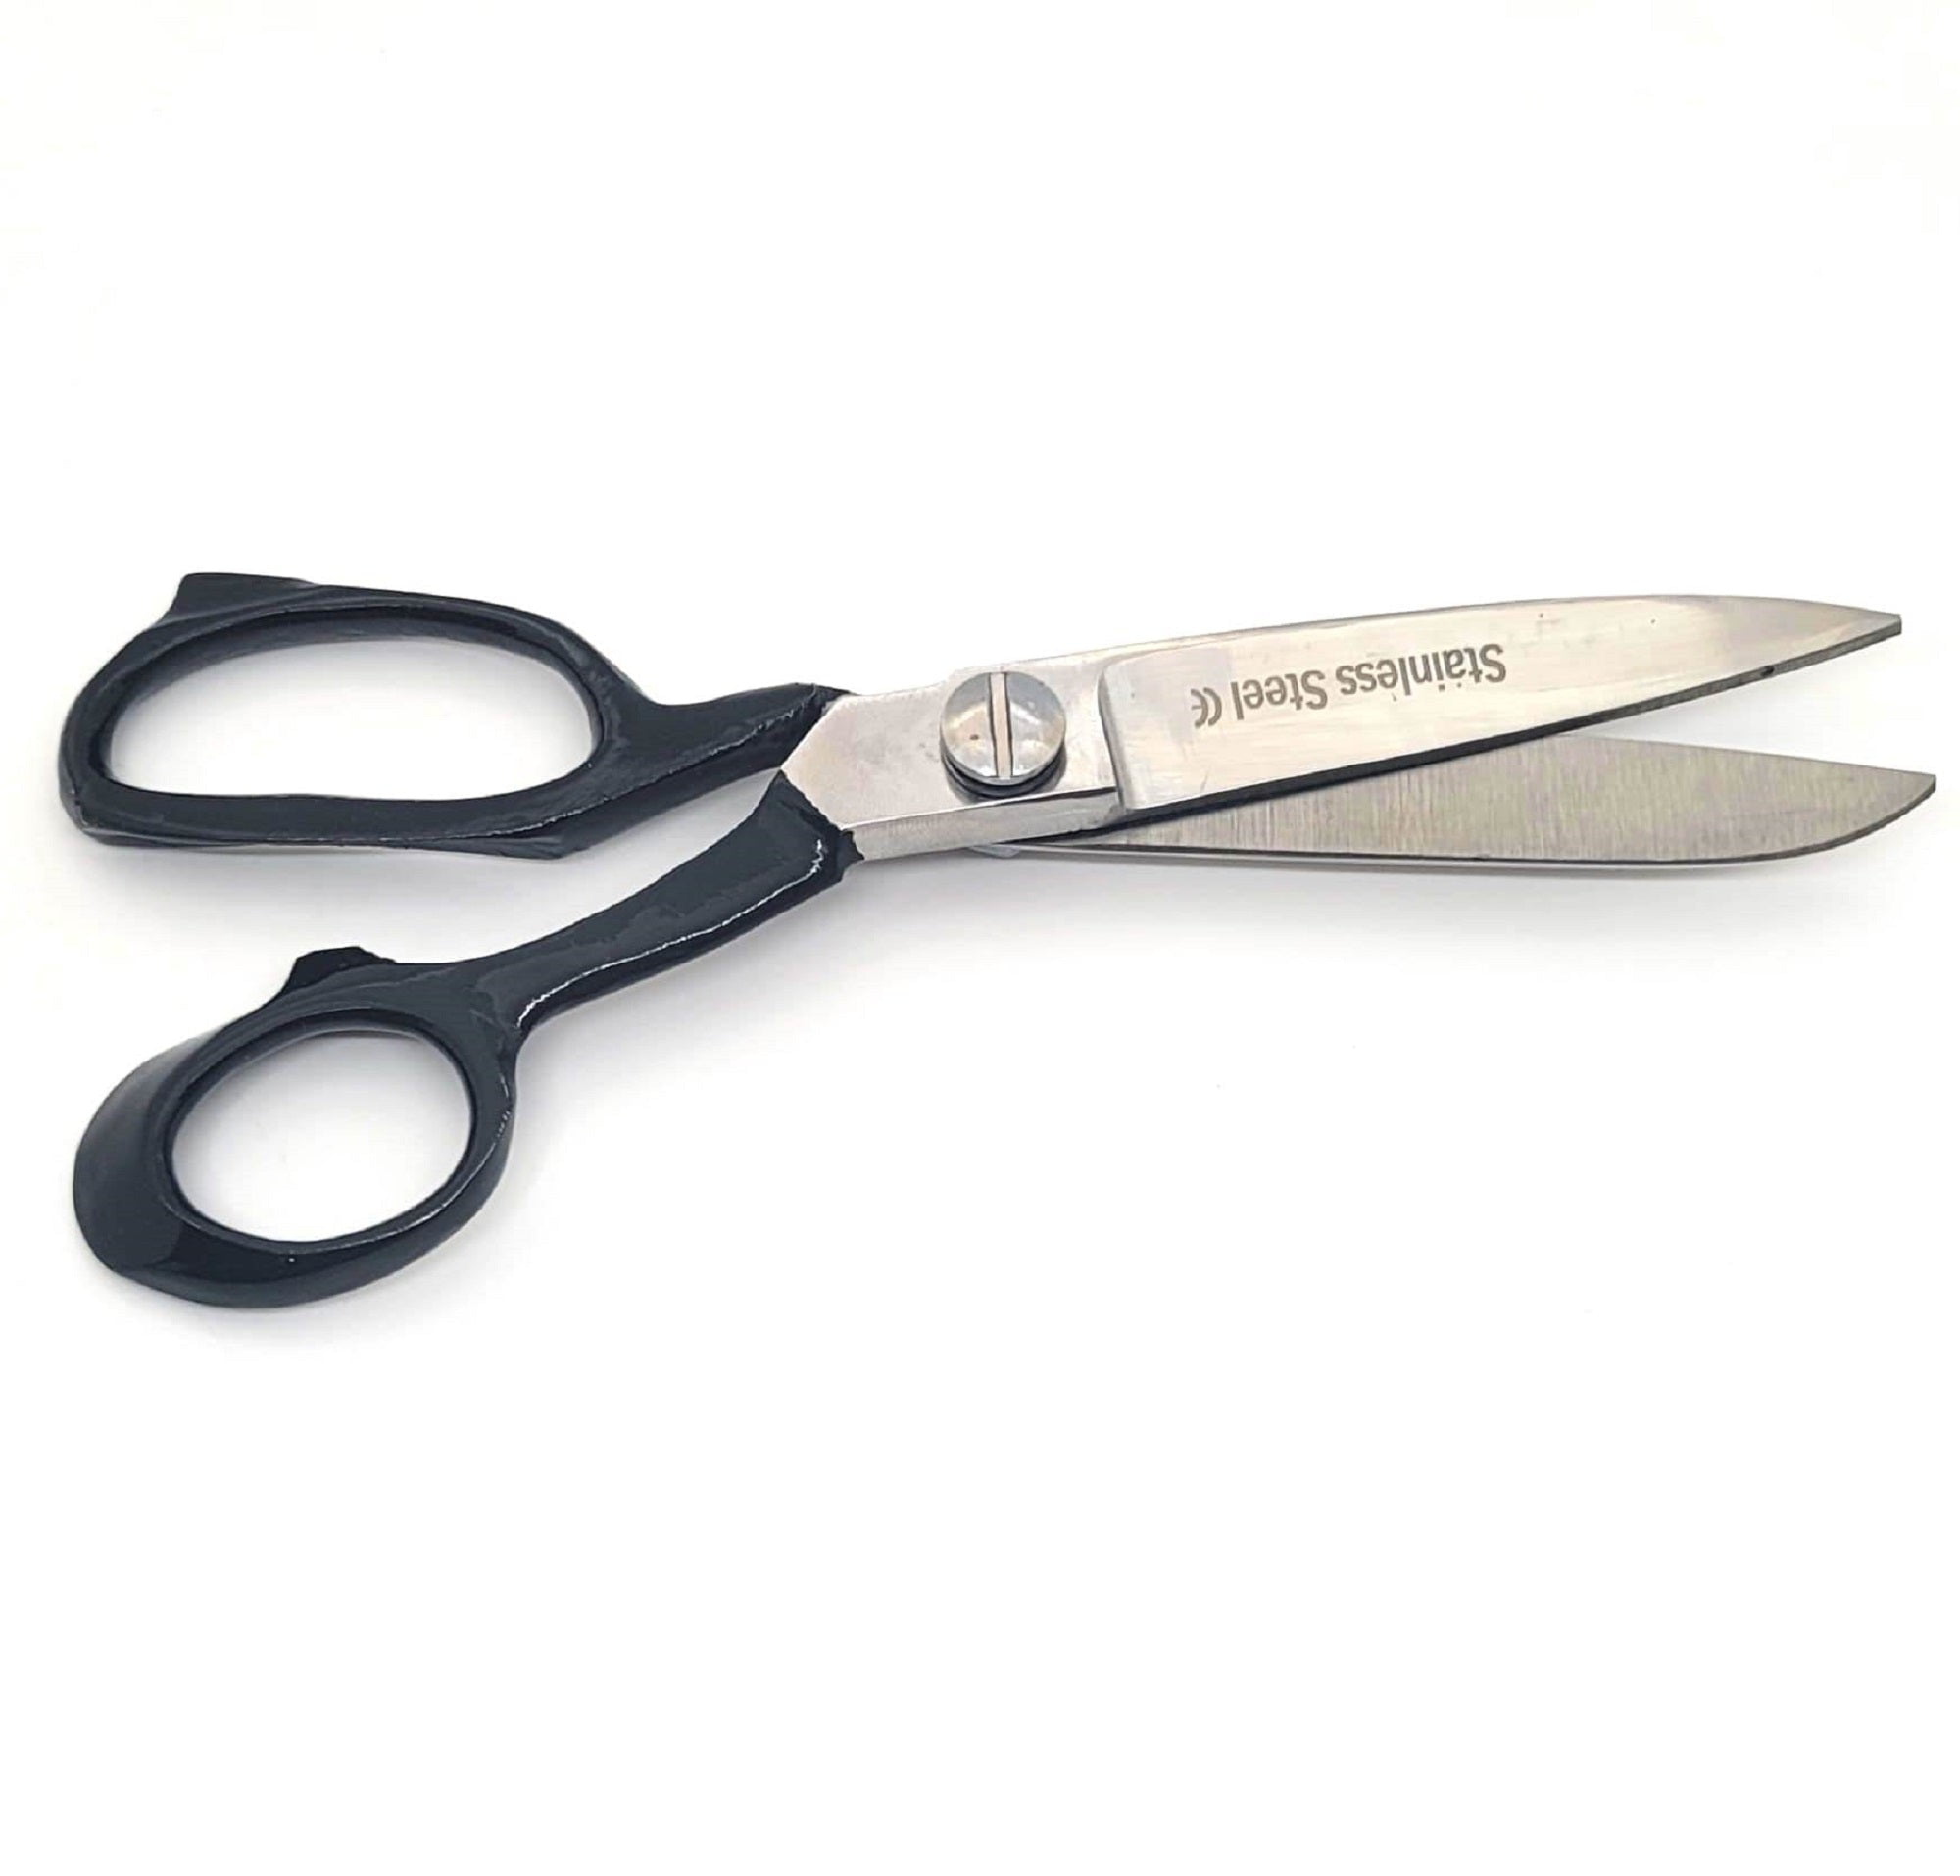 11 Stainless Tailor Scissors Sewing Dressmaking Upholstery Fabric Shears  NEW